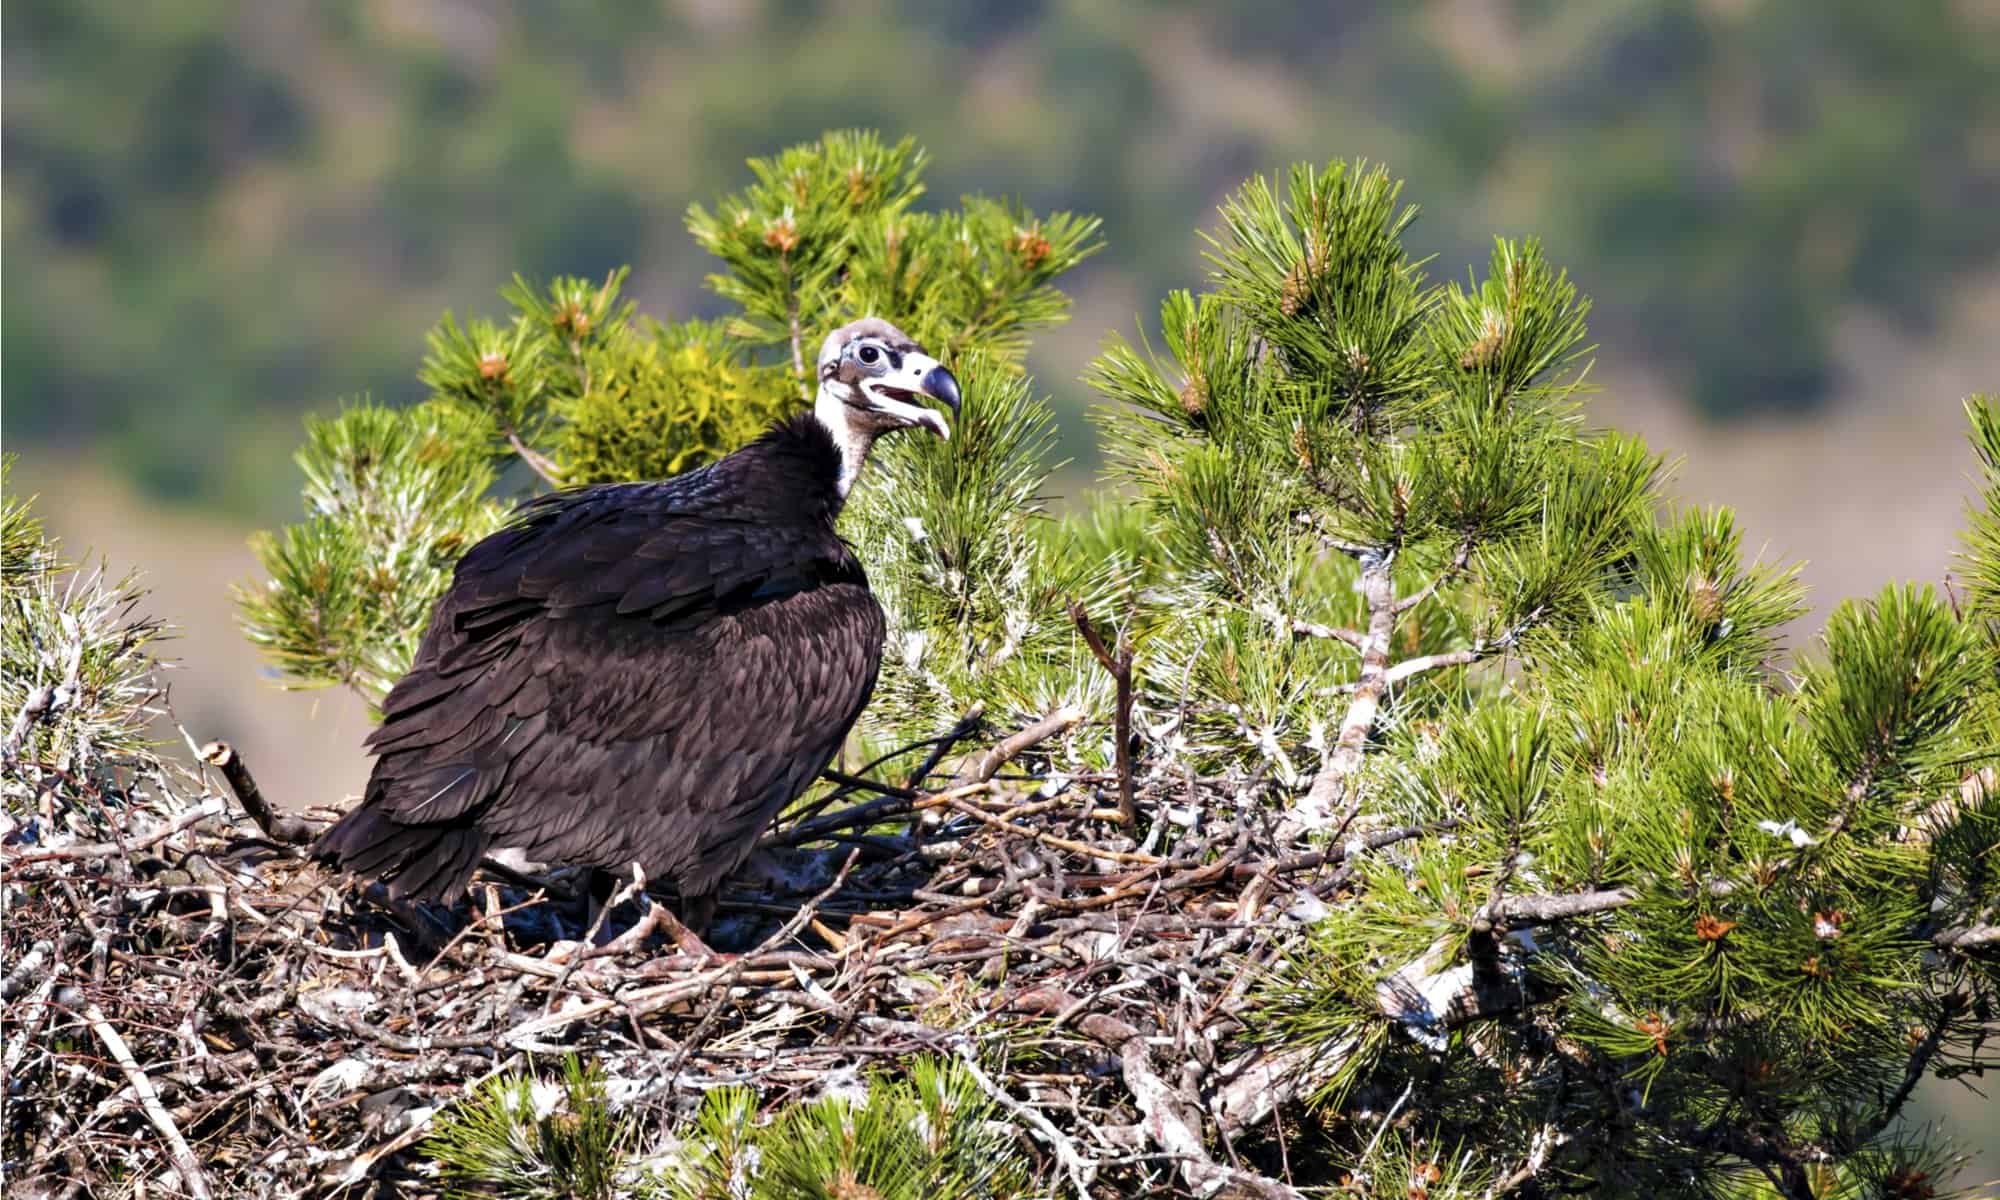 The Cinereous vulture builds a big nest, usually in an older tree or the edge of a cliff.